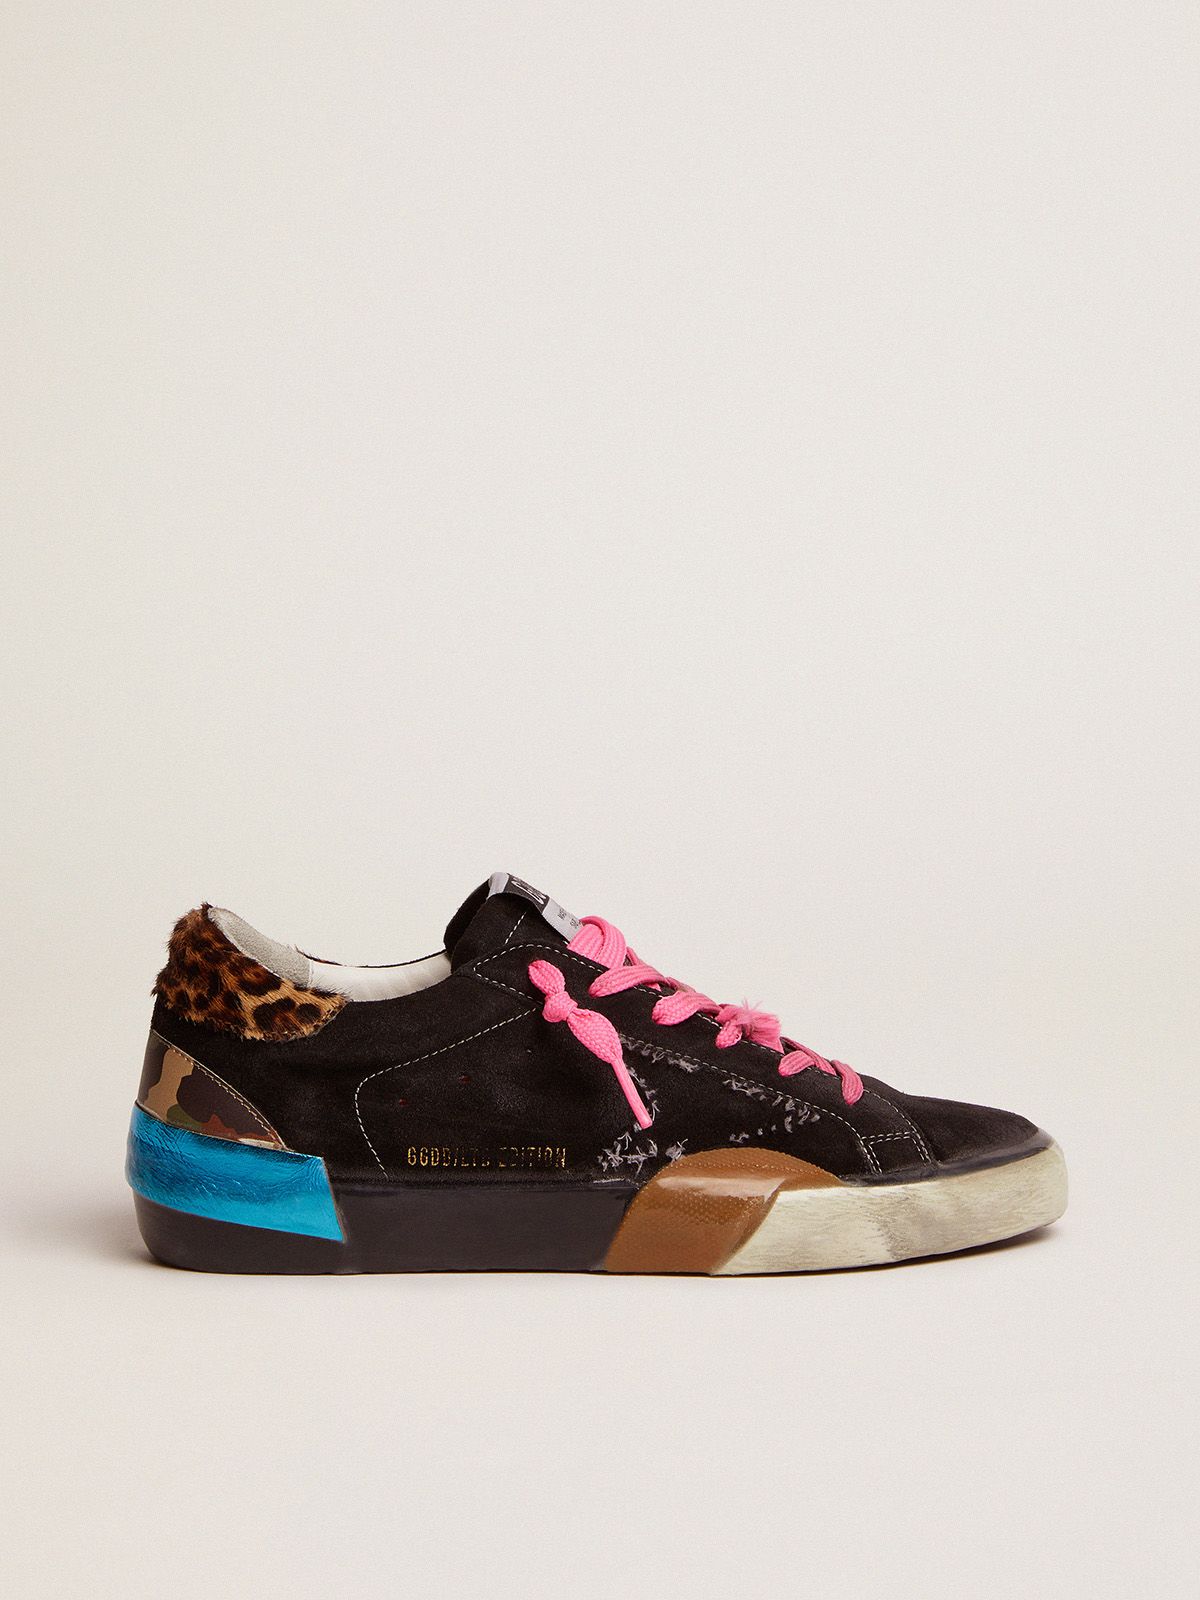 golden goose leopard-print sneakers multi-foxing skin suede with black pony tab LAB heel Super-Star in and